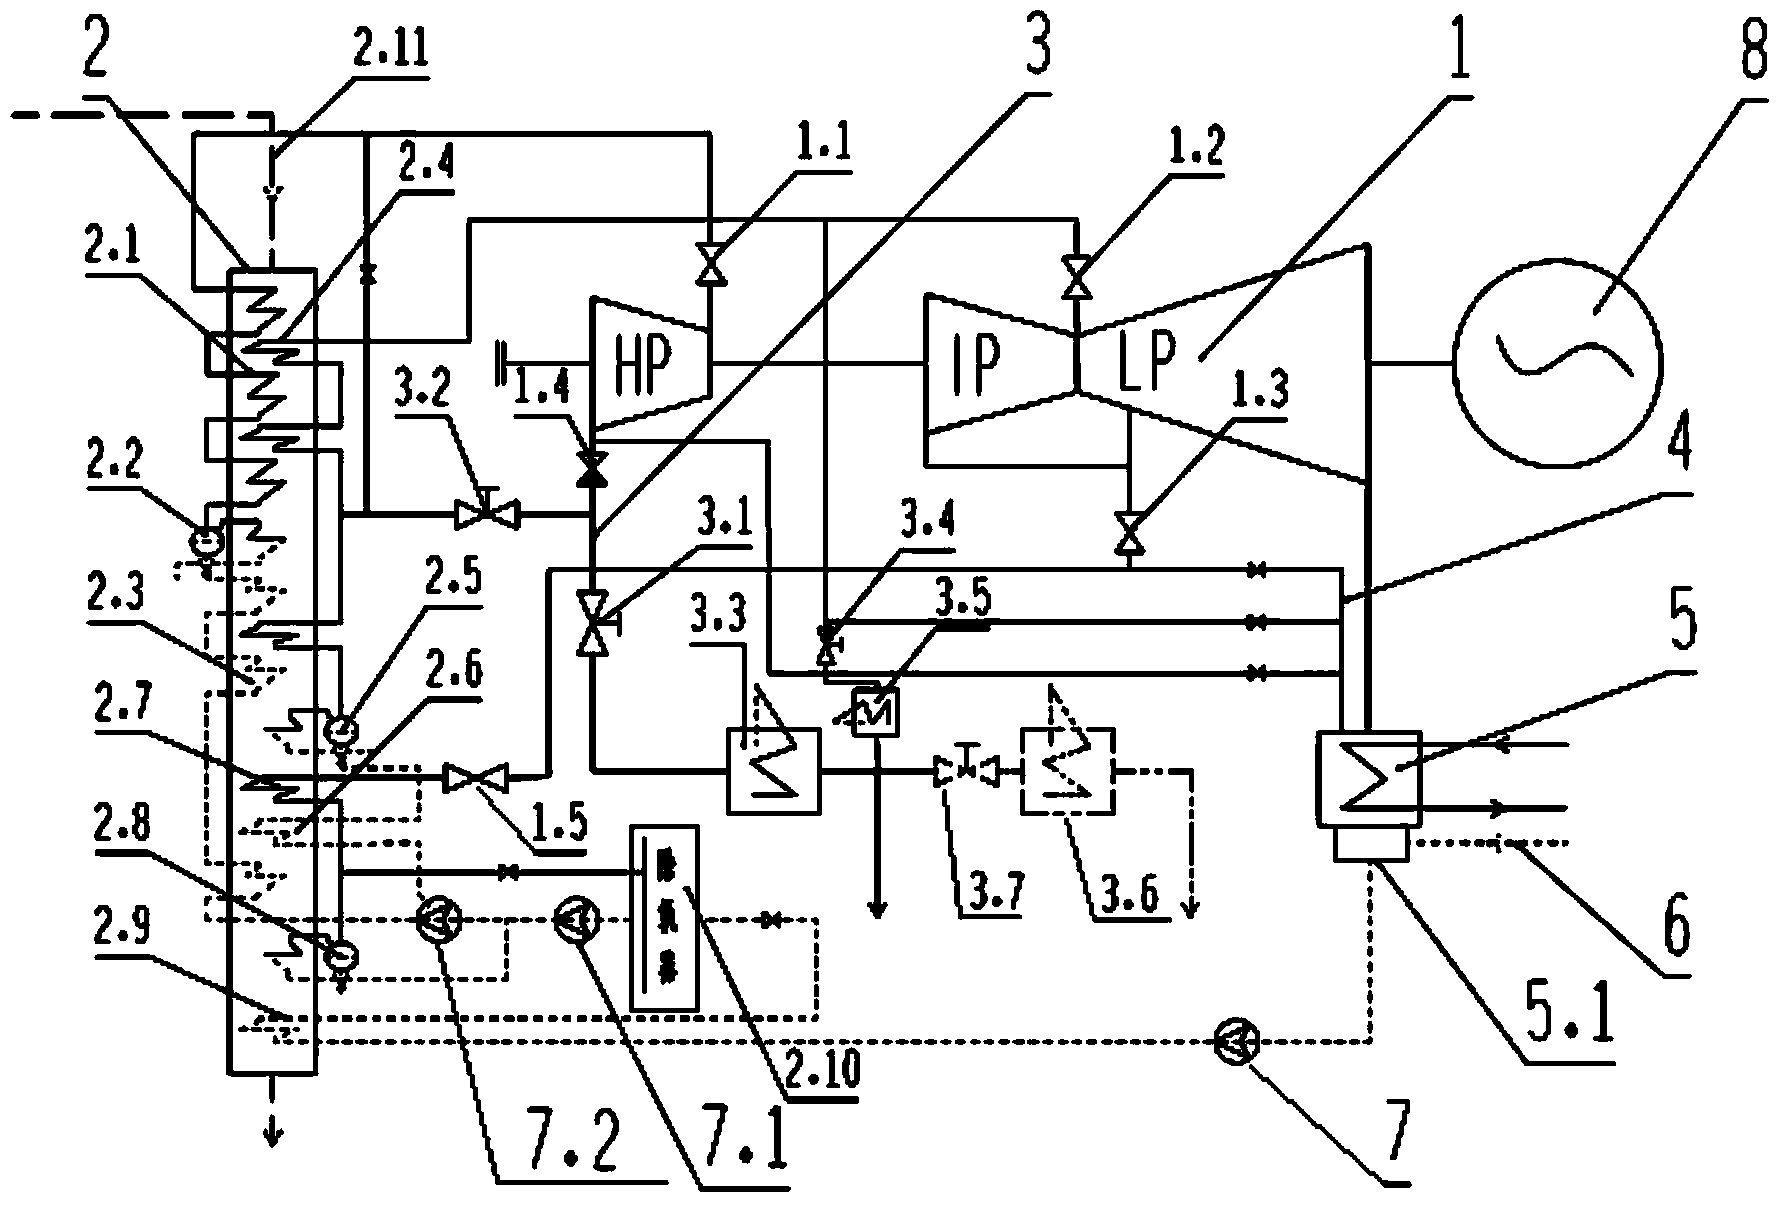 Combined-cycle combined heat and power system